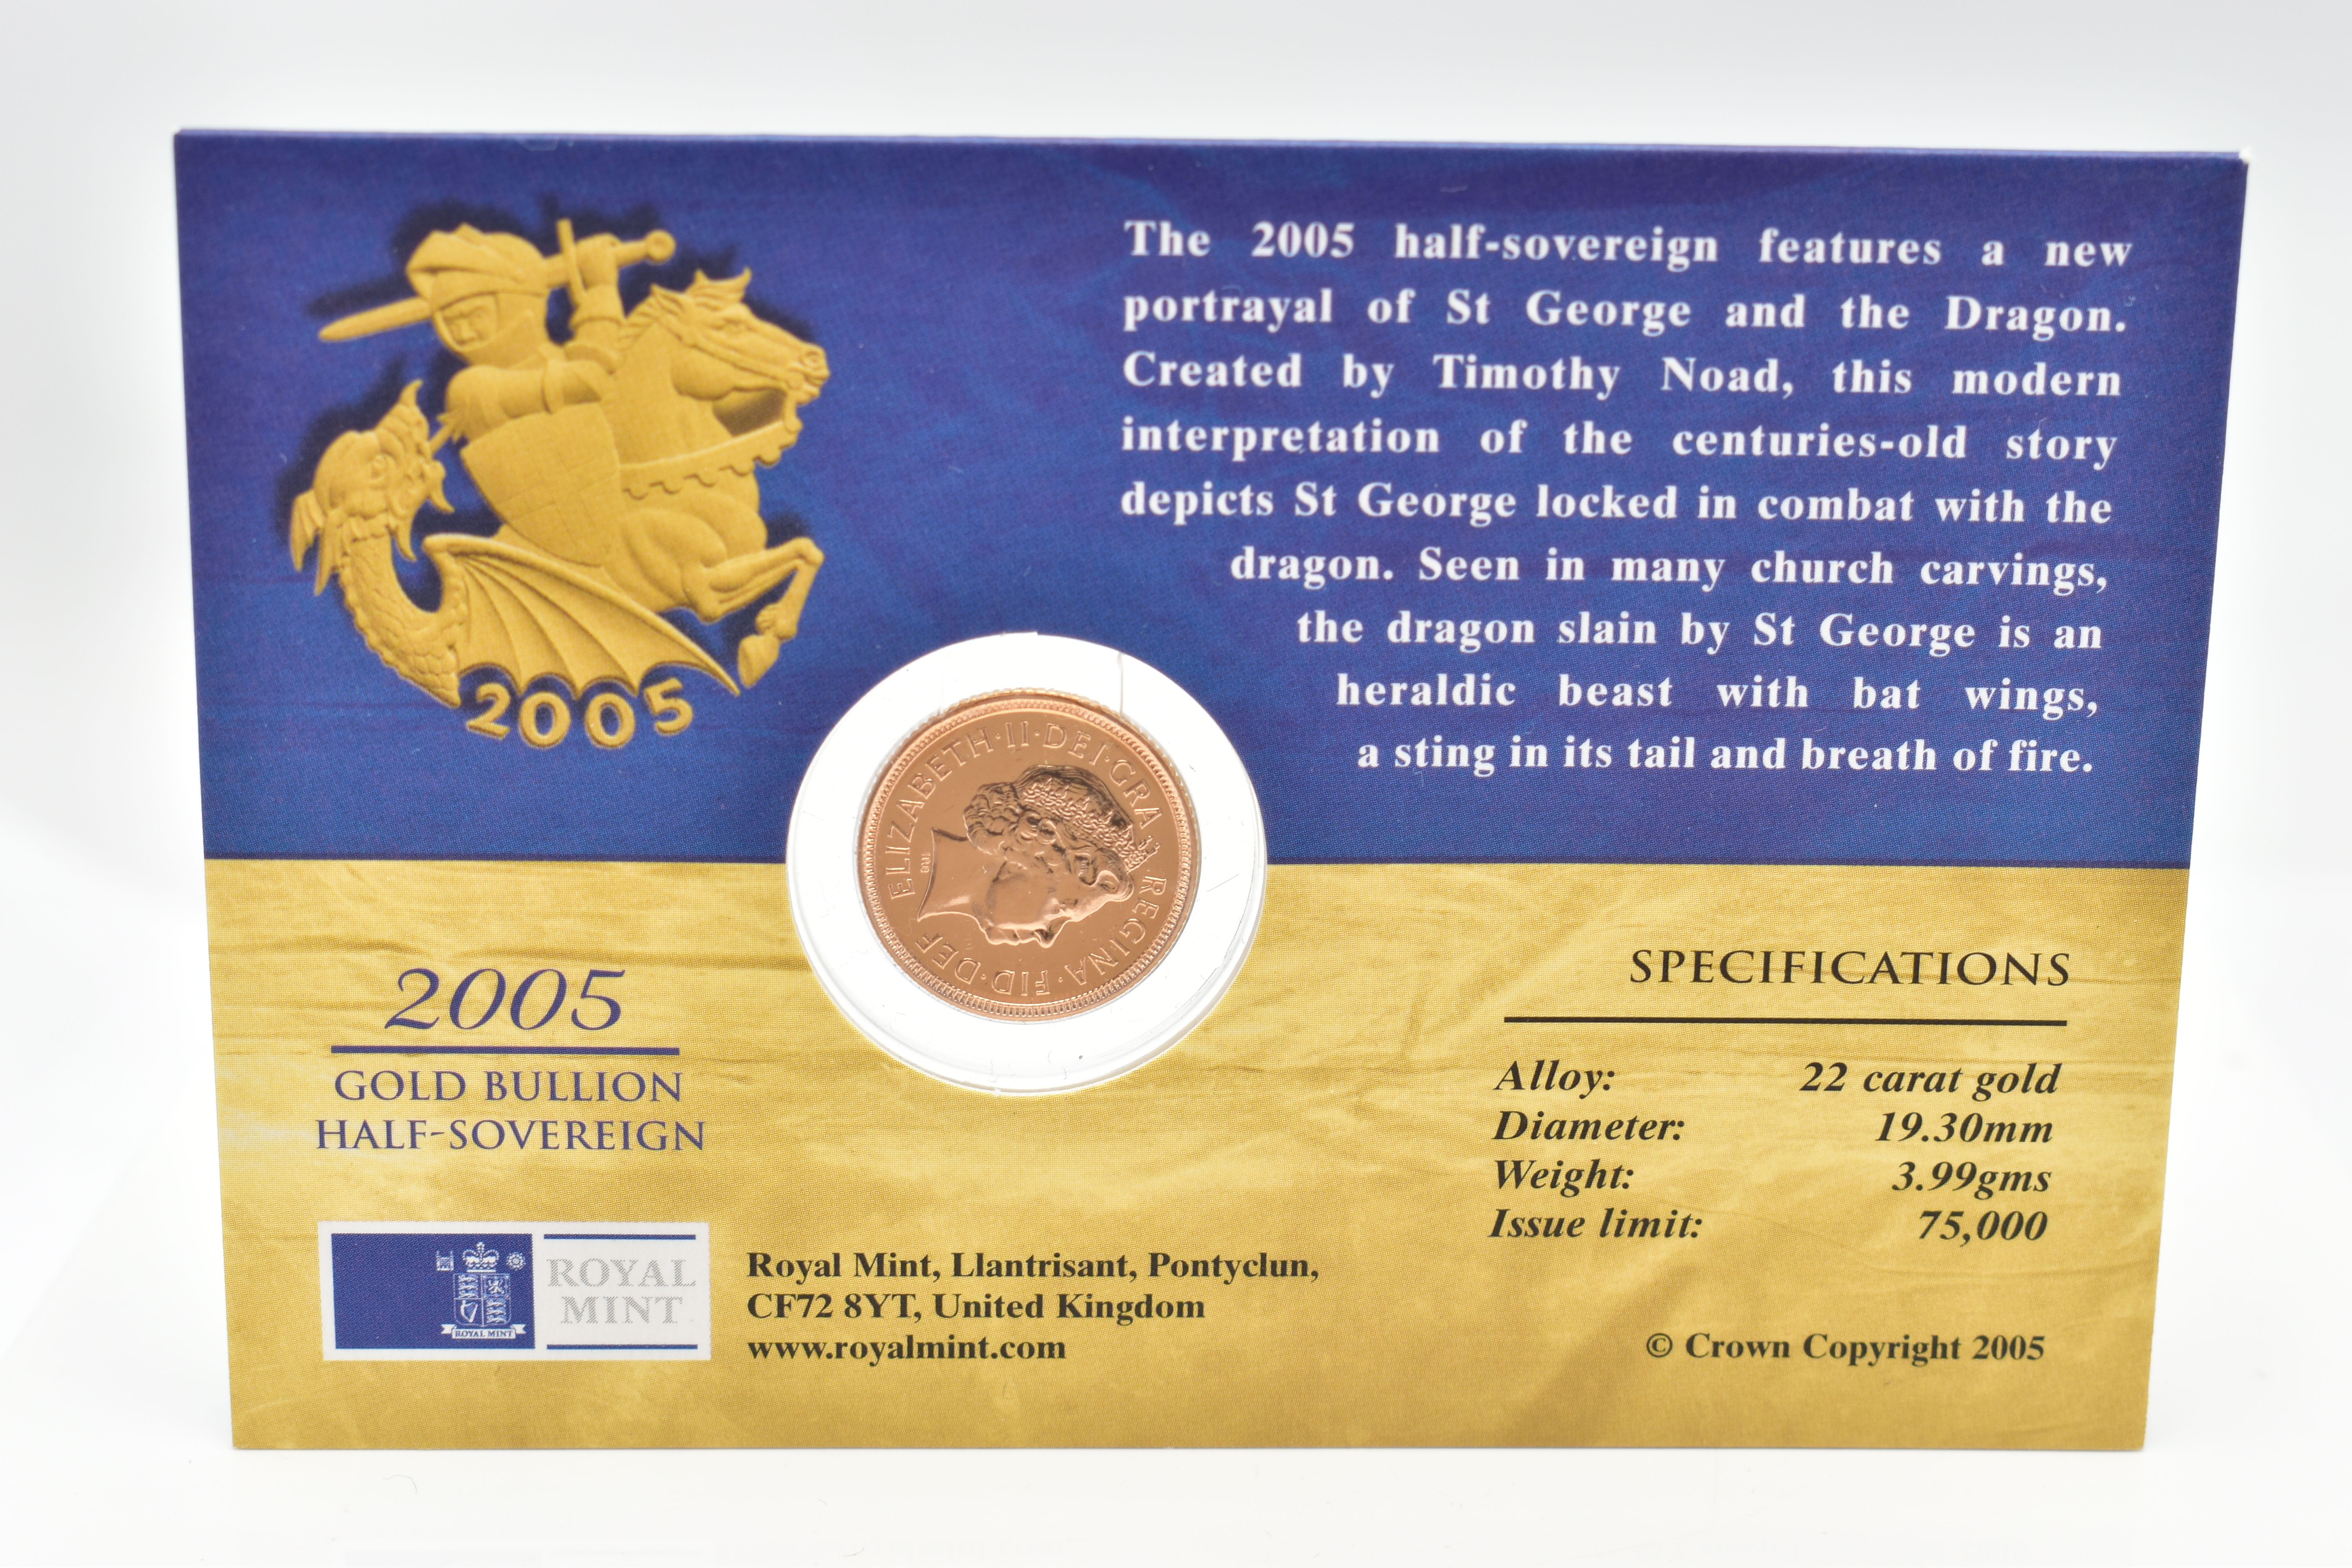 A ROYAL MINT CARDED 2005 GOLD BULLION HALF SOVEREIGN COIN, 19.3mm, 3.99 grams, issue limit 75,000, - Image 2 of 2